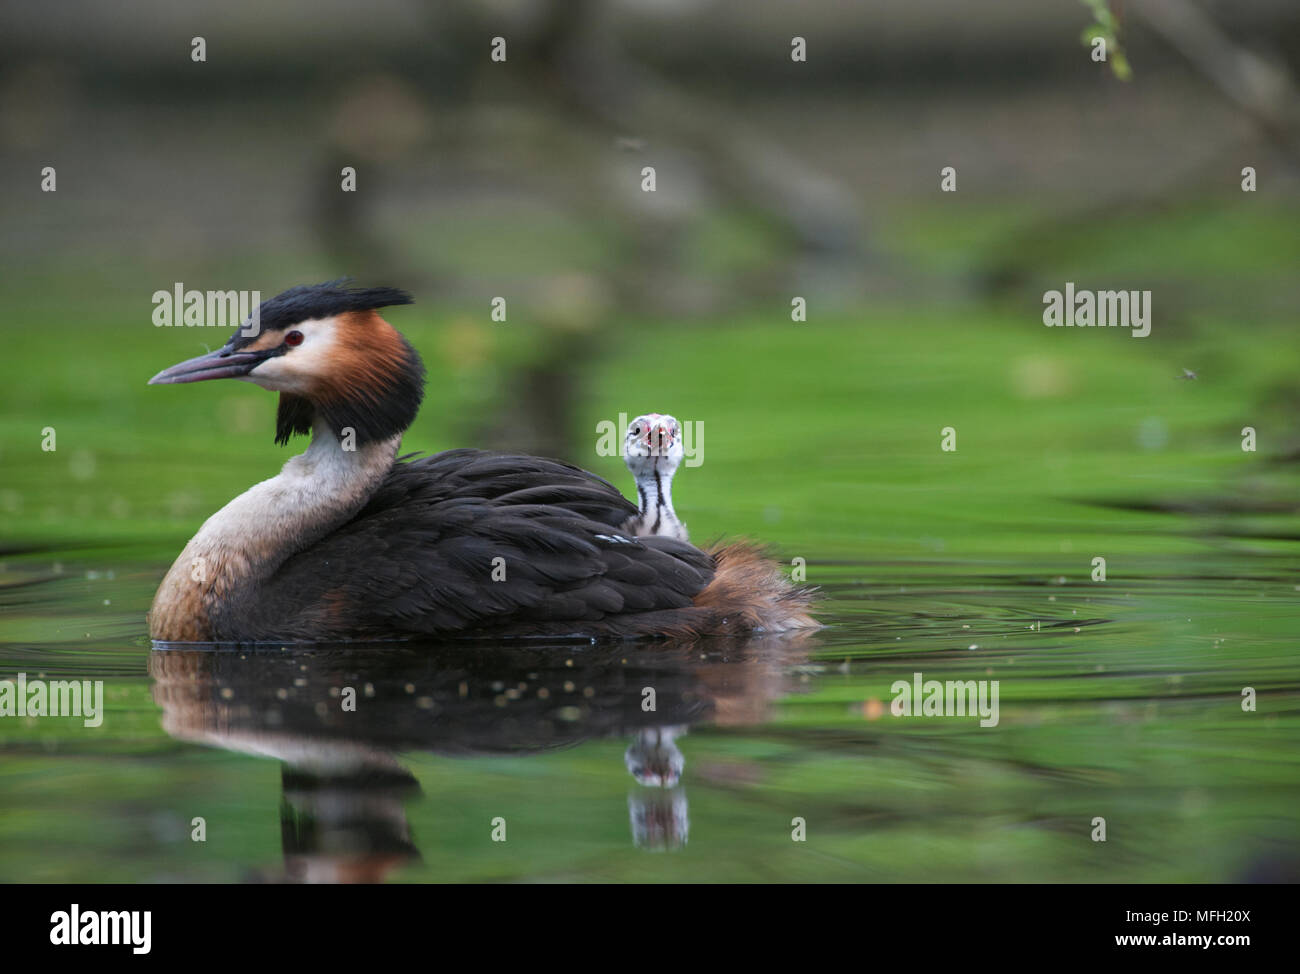 Great Crested Grebe, (Podiceps cristatus), parent bird carrying a single chick on its back, Regents Park, London, Briitish Isles, UK Stock Photo